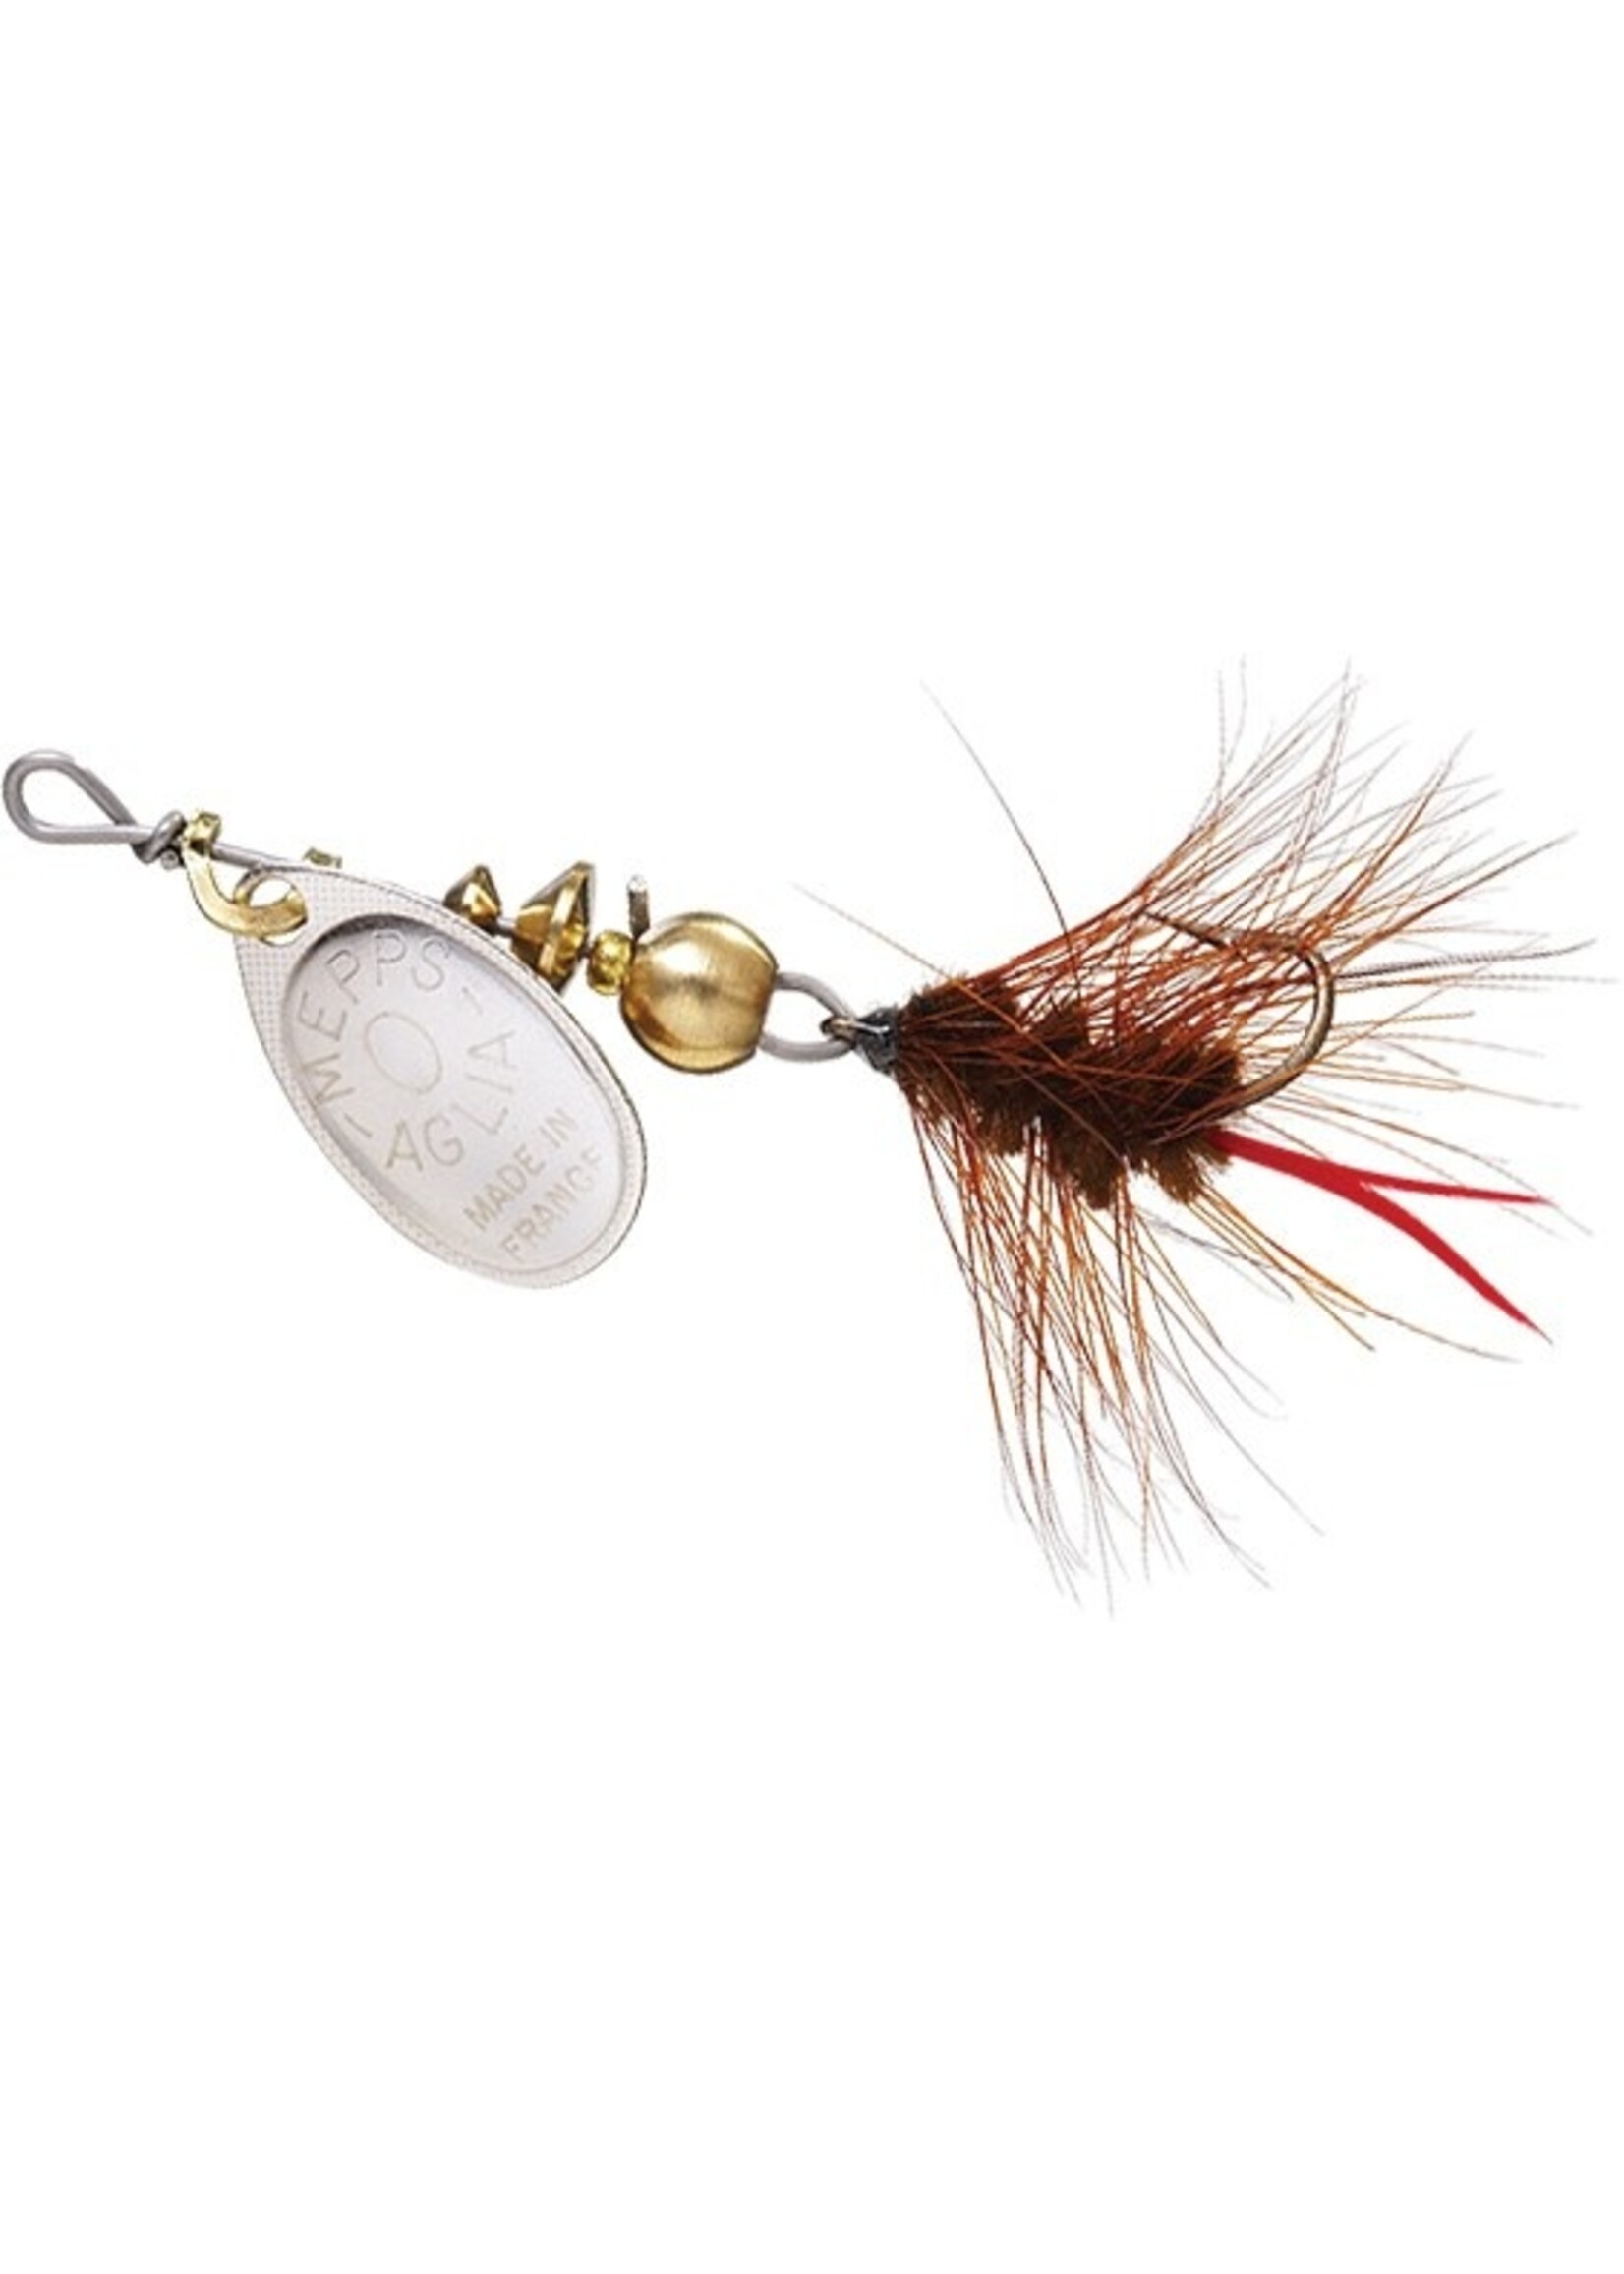 Mepps Aglia Spin Fly Wooly Worm Single Hook Spinner - Tackle Shack